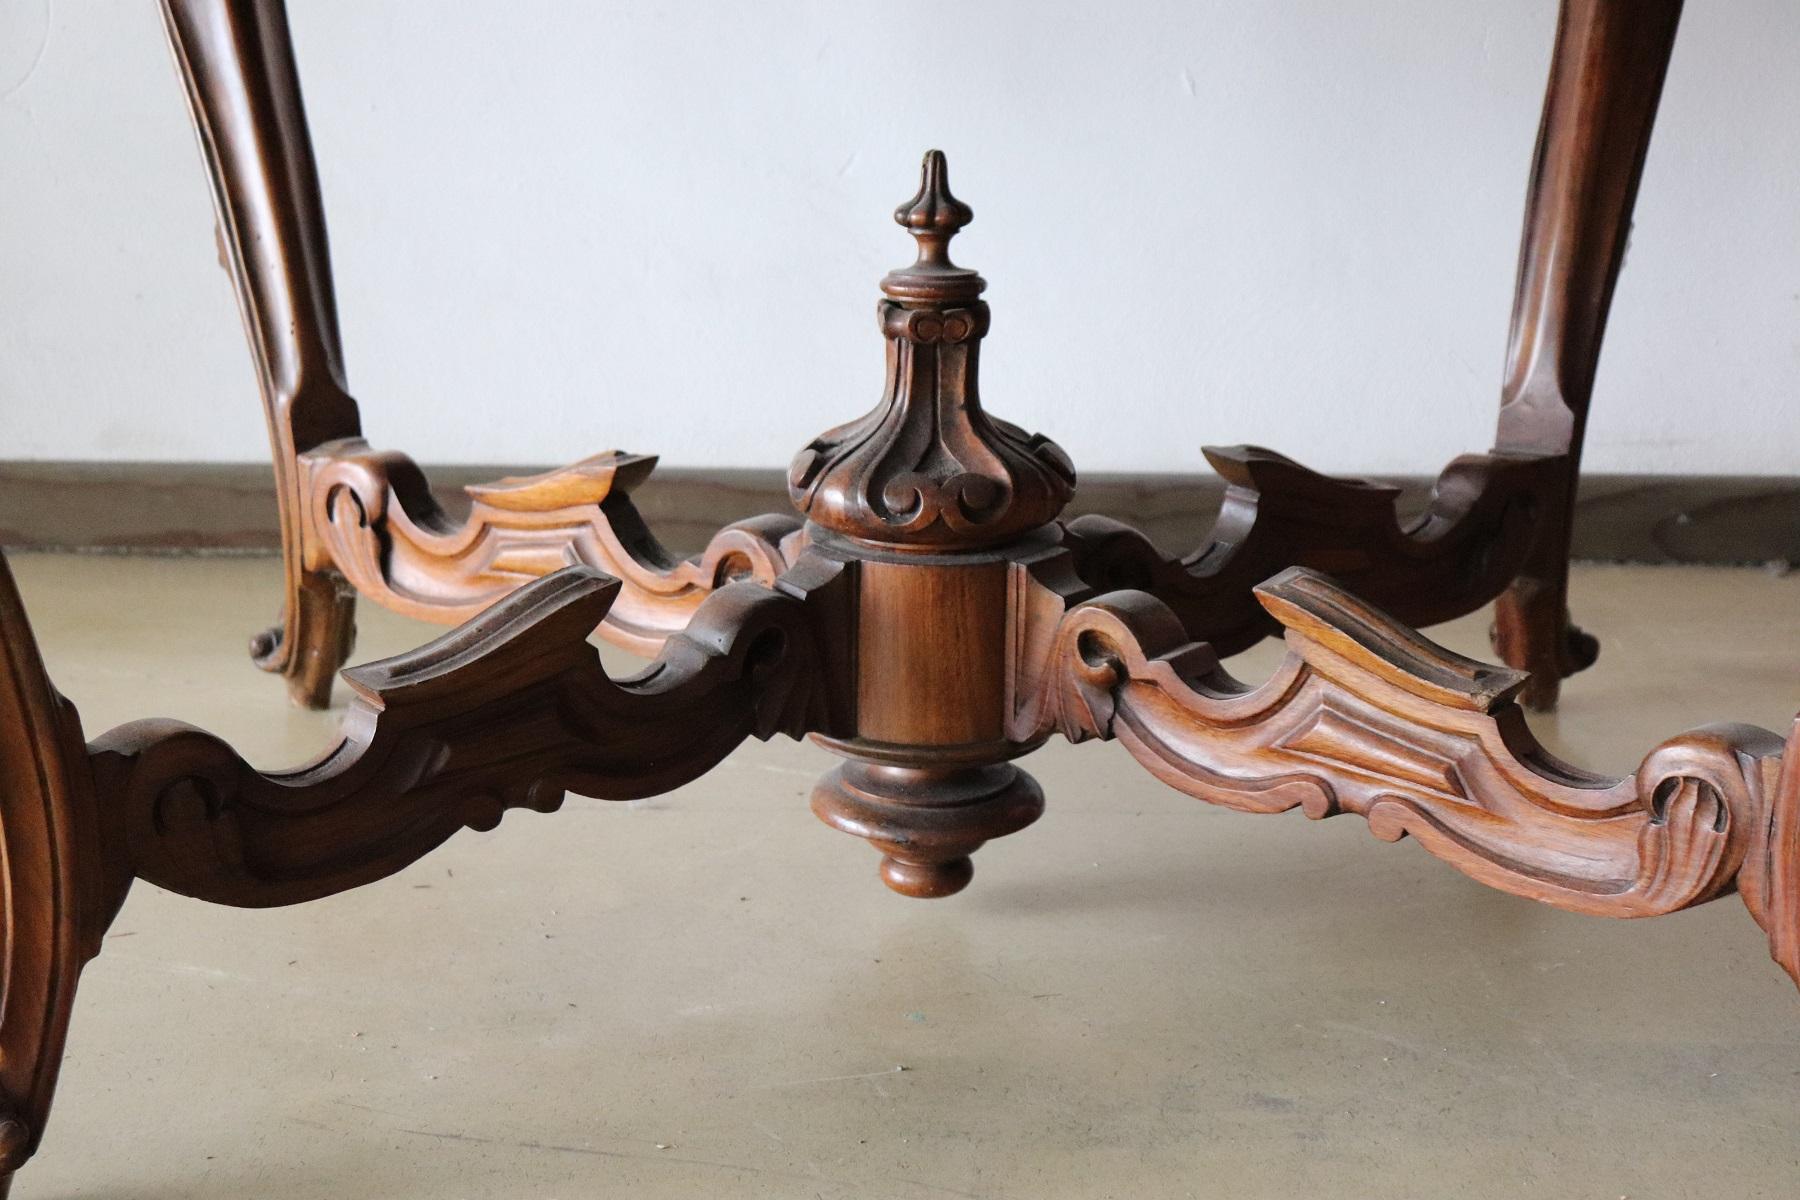 Louis Philippe 19th Century Italian Carved Walnut and Briar Large Center Table For Sale